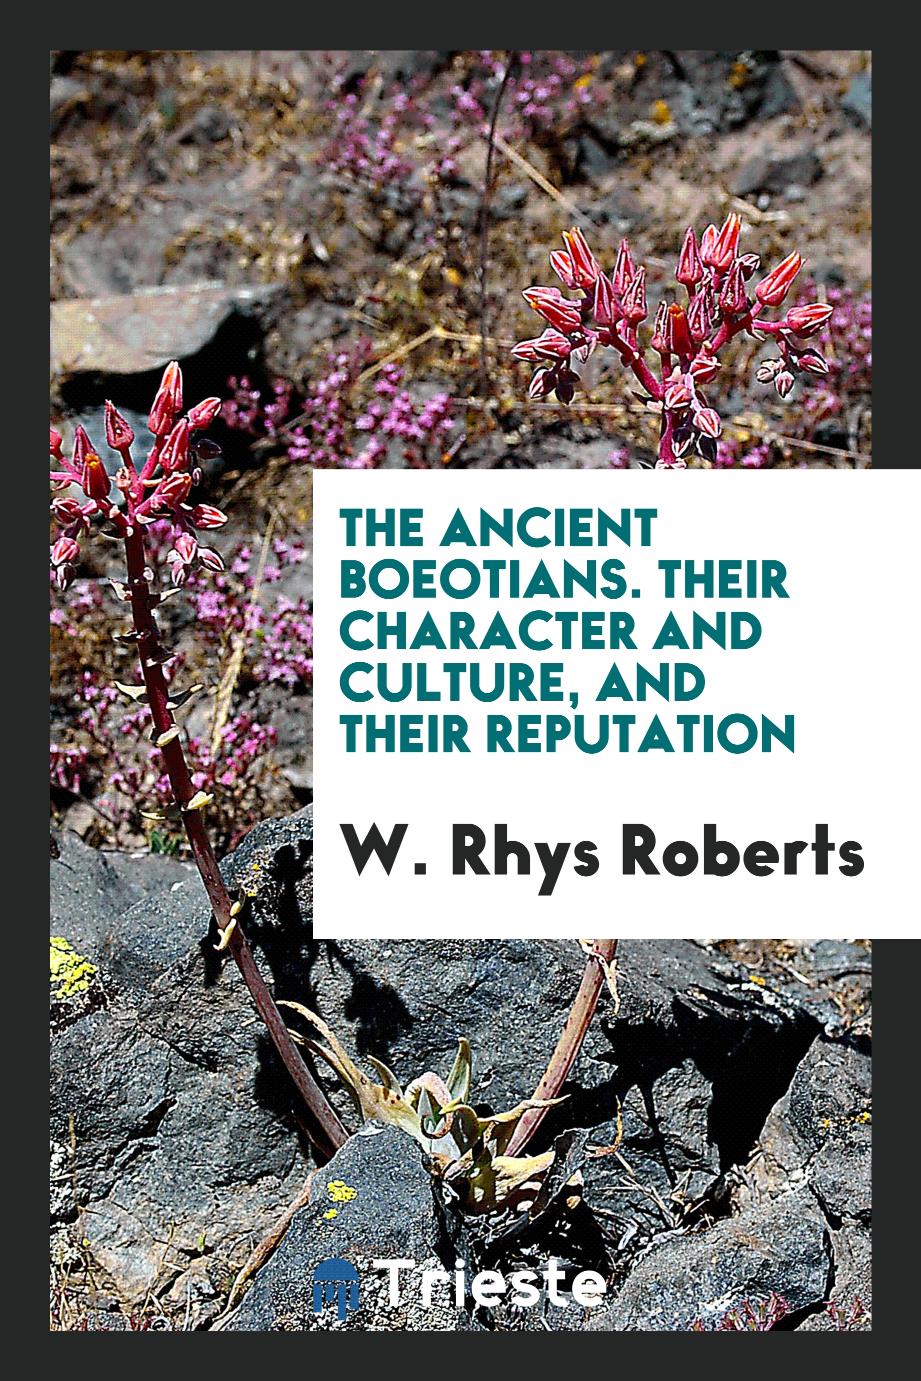 The Ancient Boeotians. Their Character and Culture, and Their Reputation